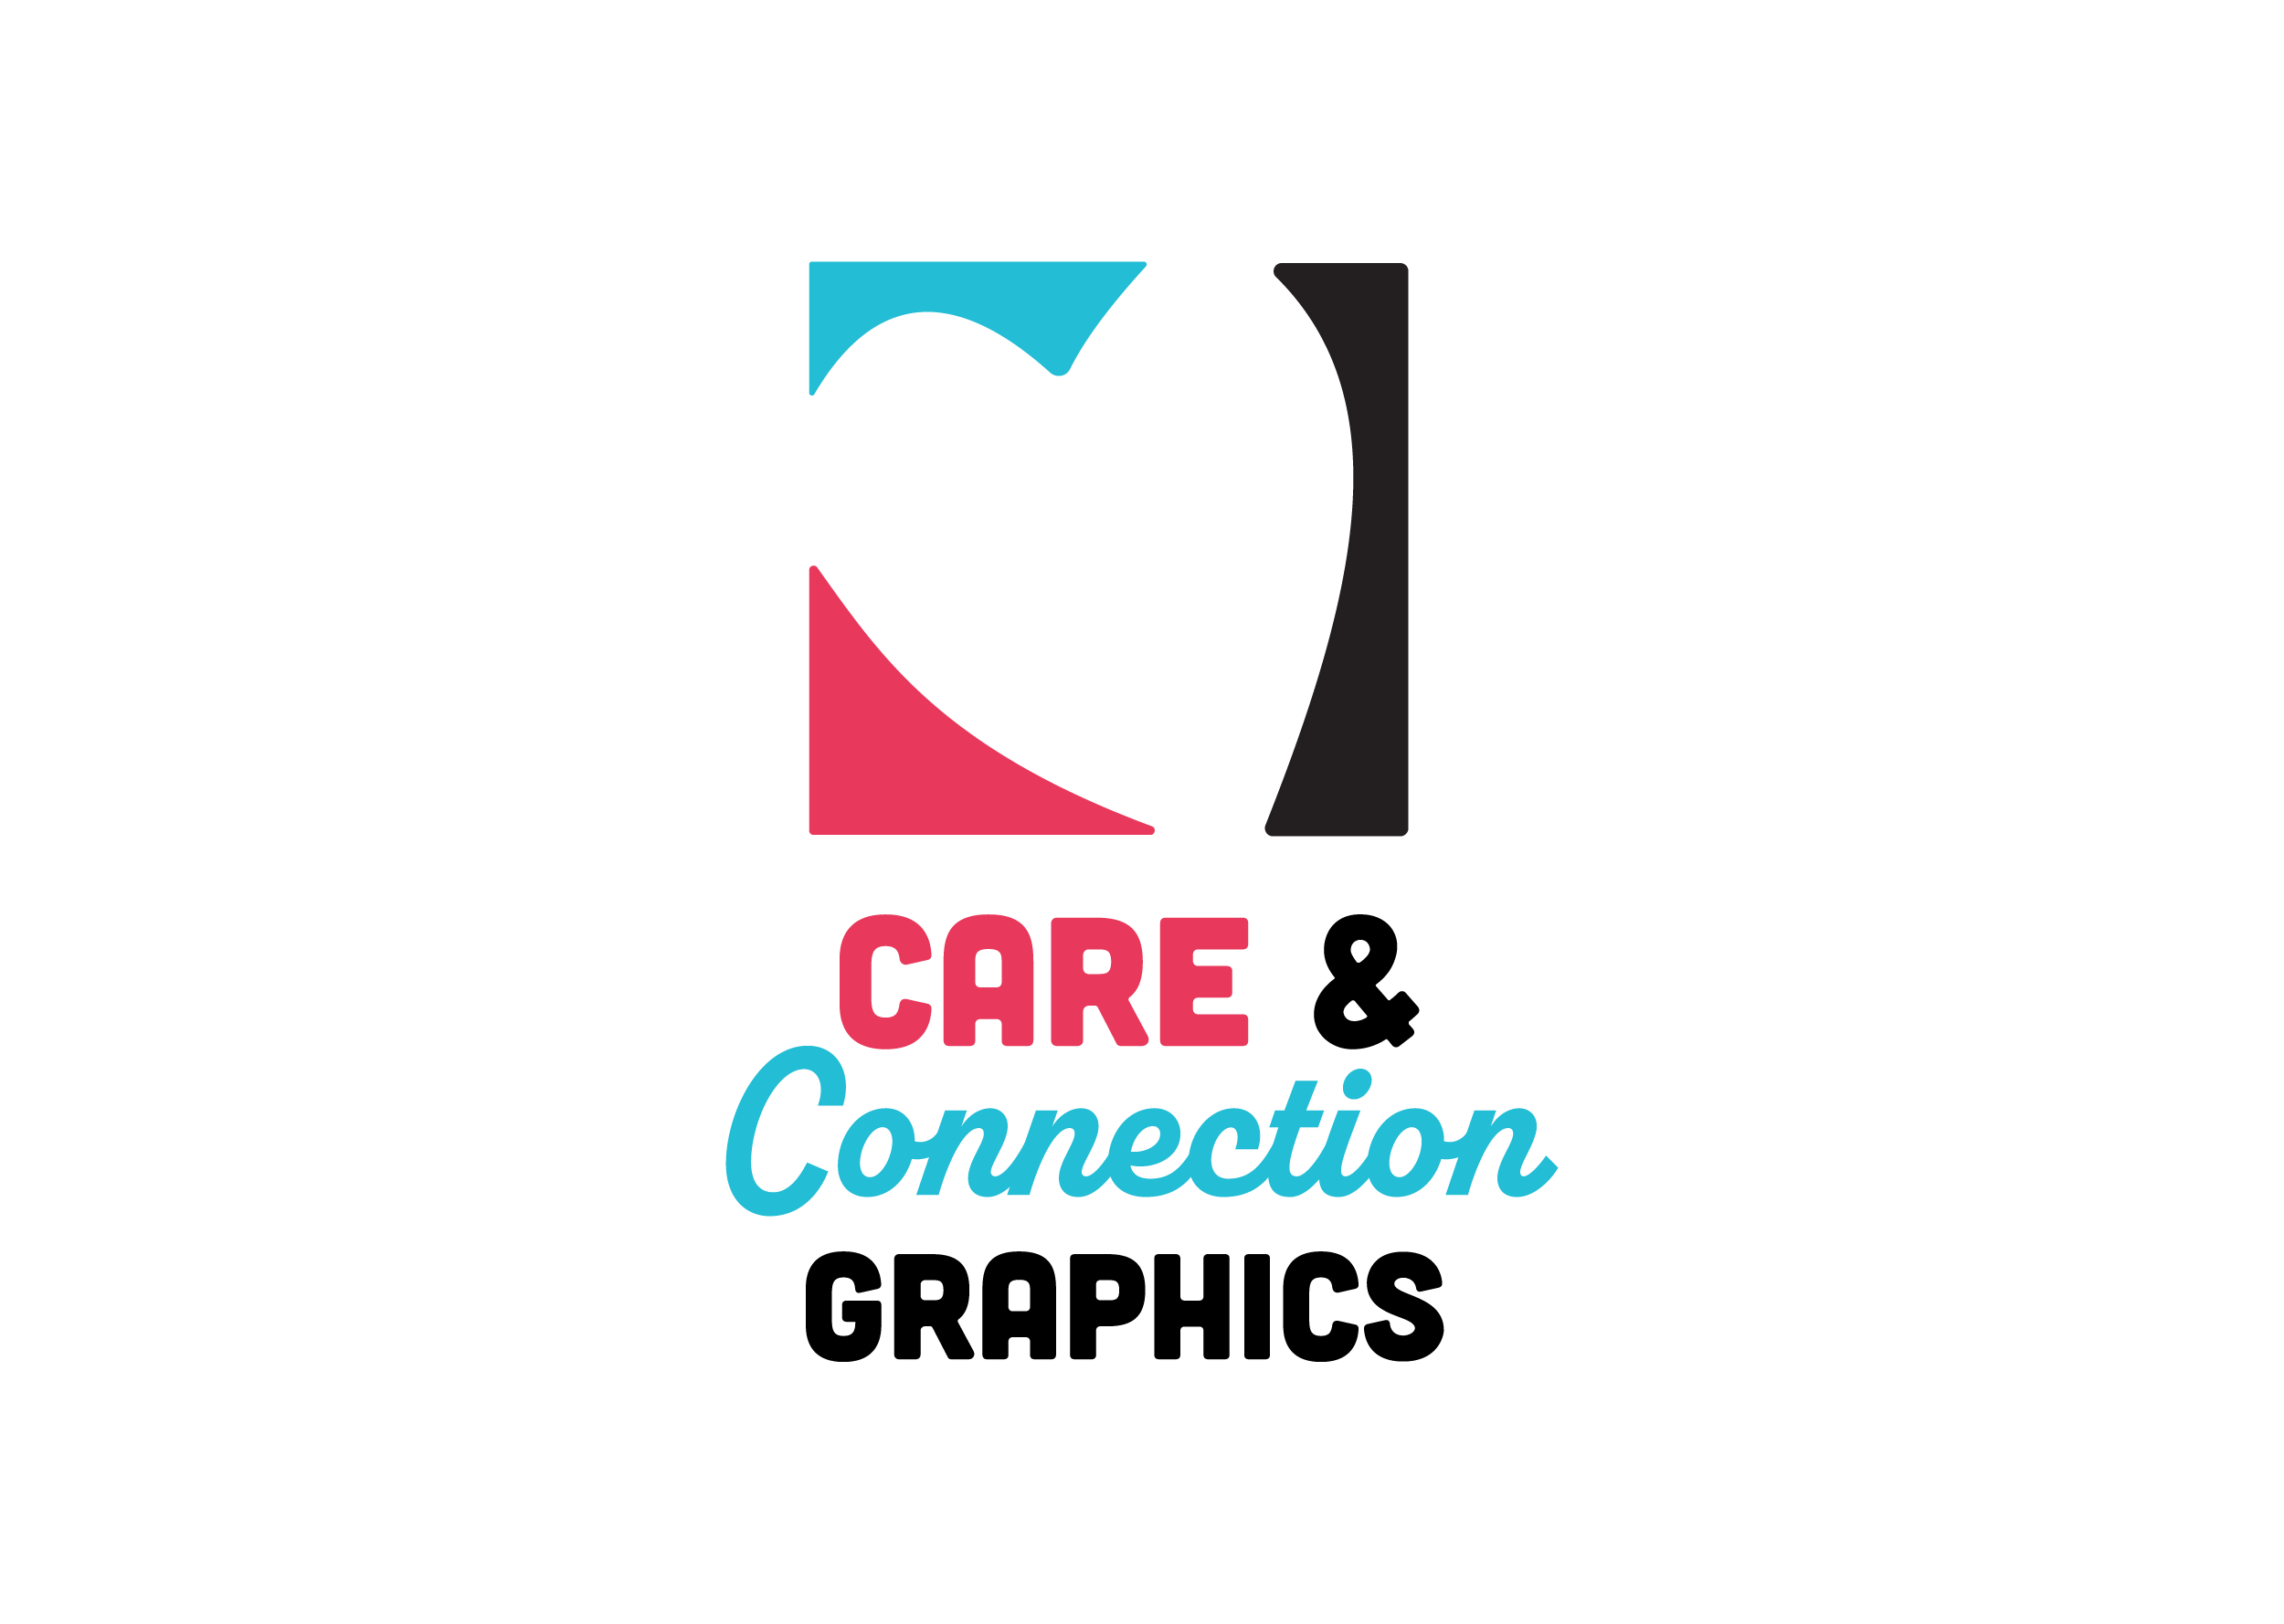 Care & Connection Tools